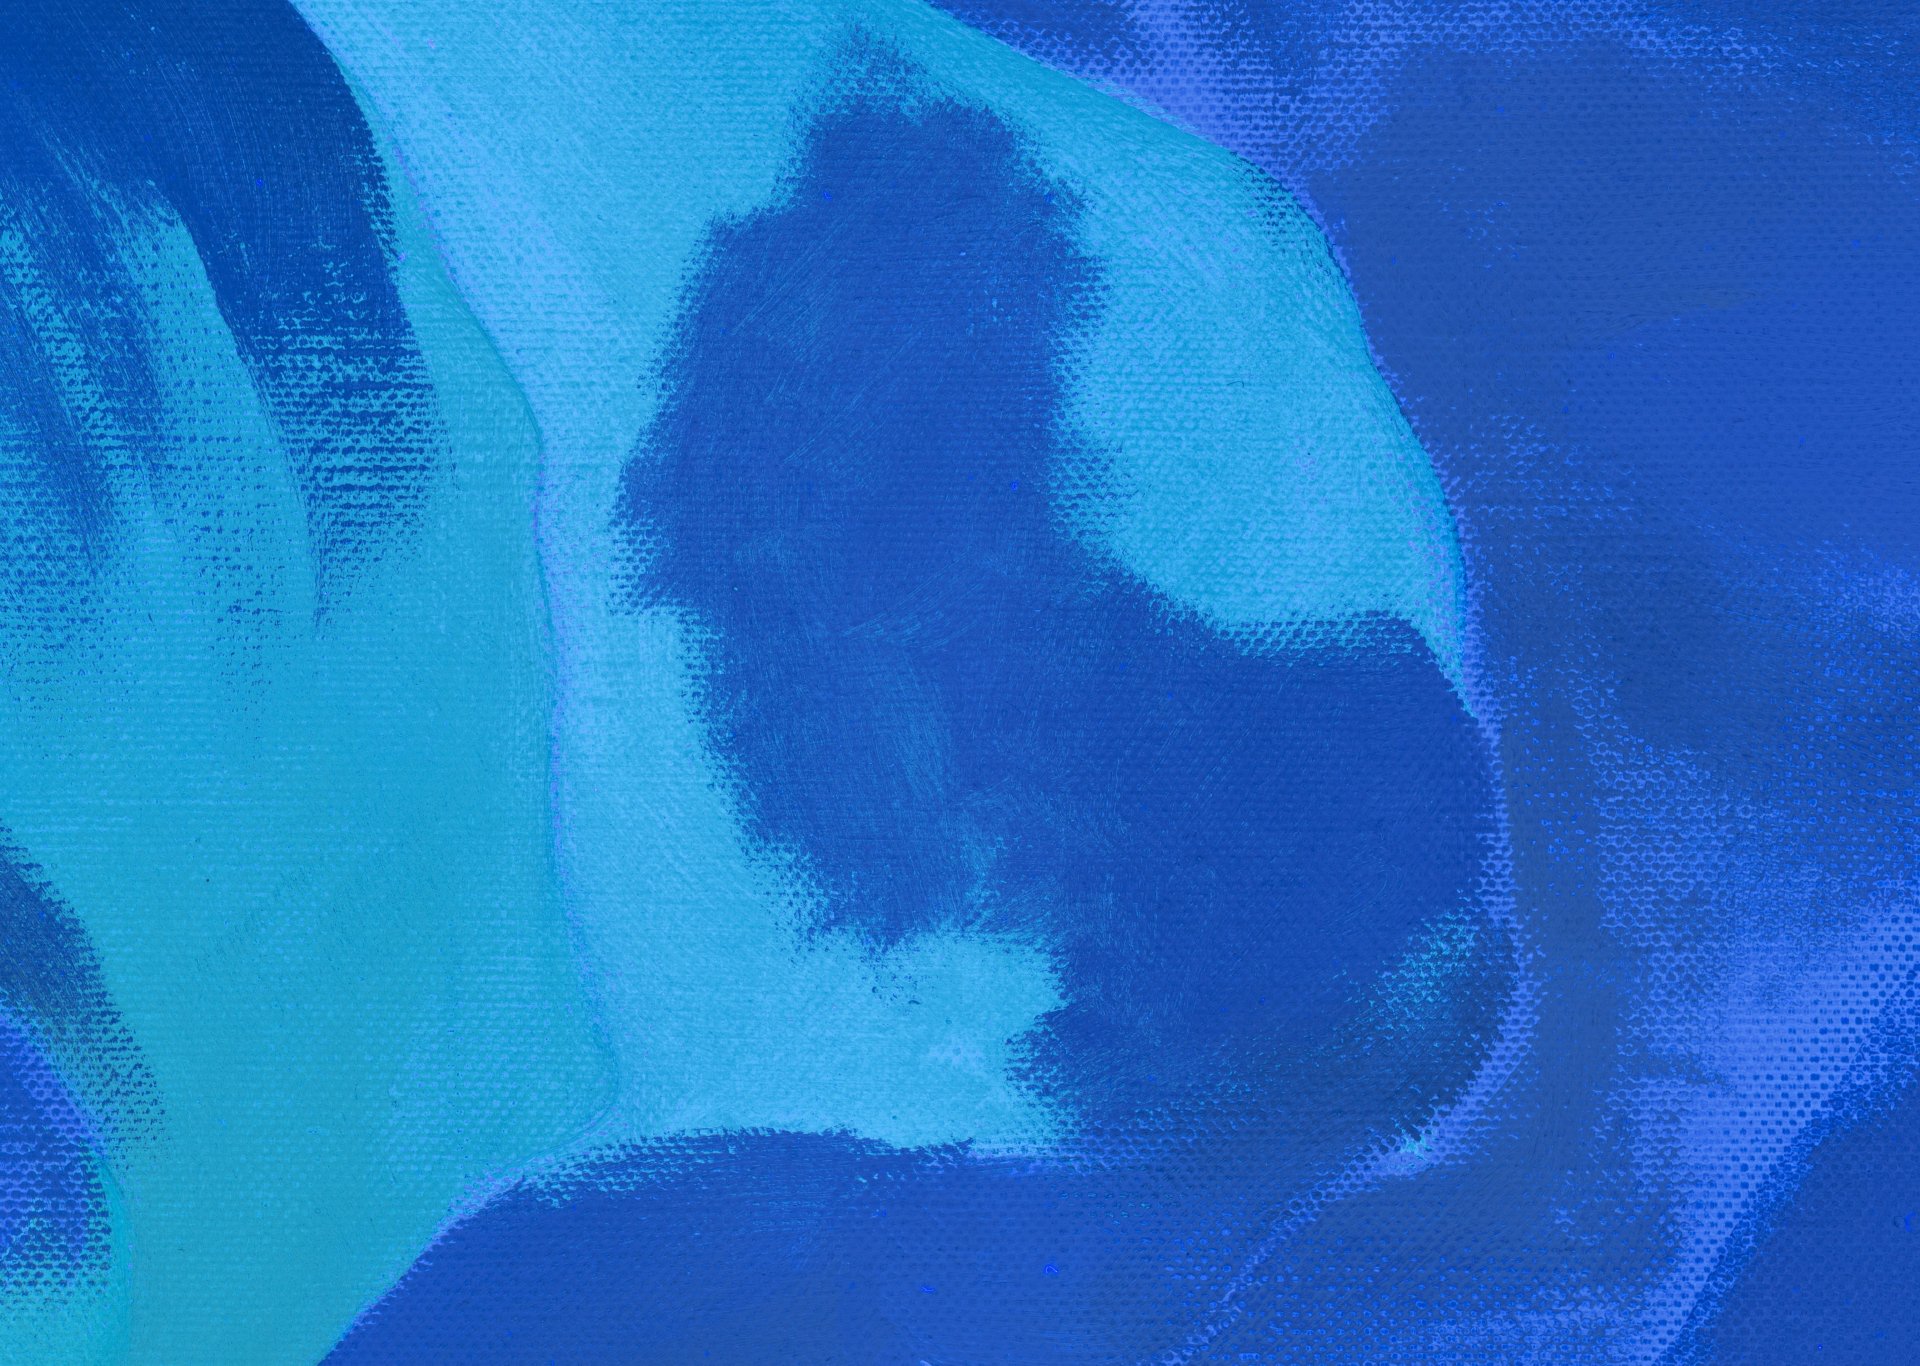 Detail of the ultraviolet image of the painting “White Iris No. 7”, 1957